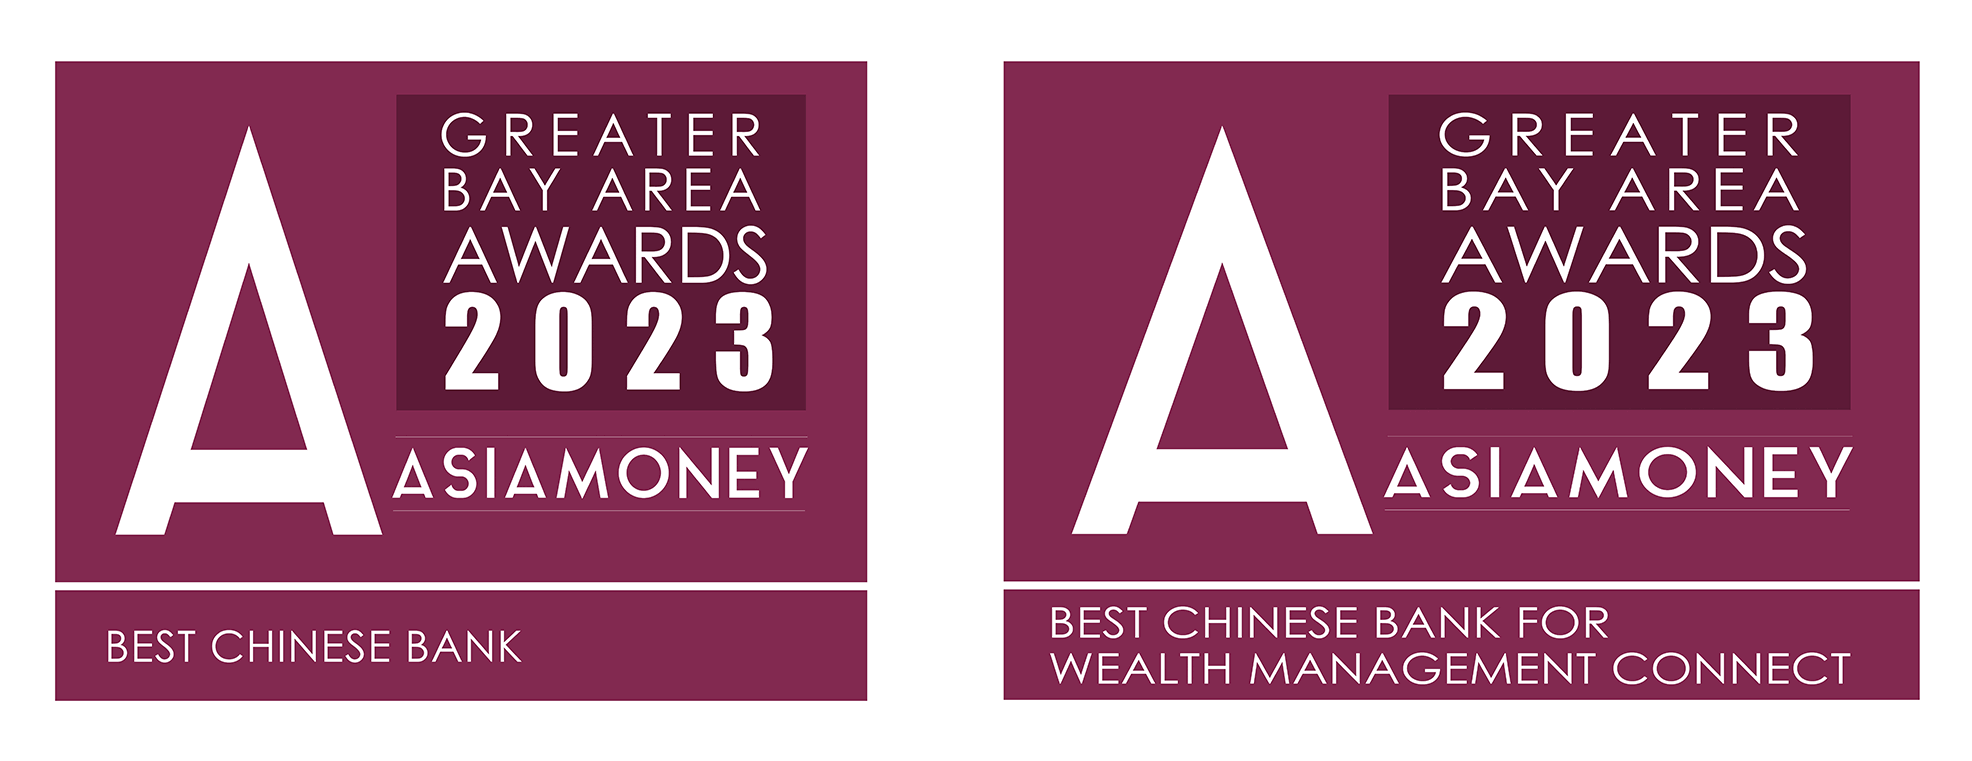 Best Chinese Bank for the Greater Bay Area 2023 and
Best Chinese Bank for Wealth Management Connect of the Greater Bay Area 2023